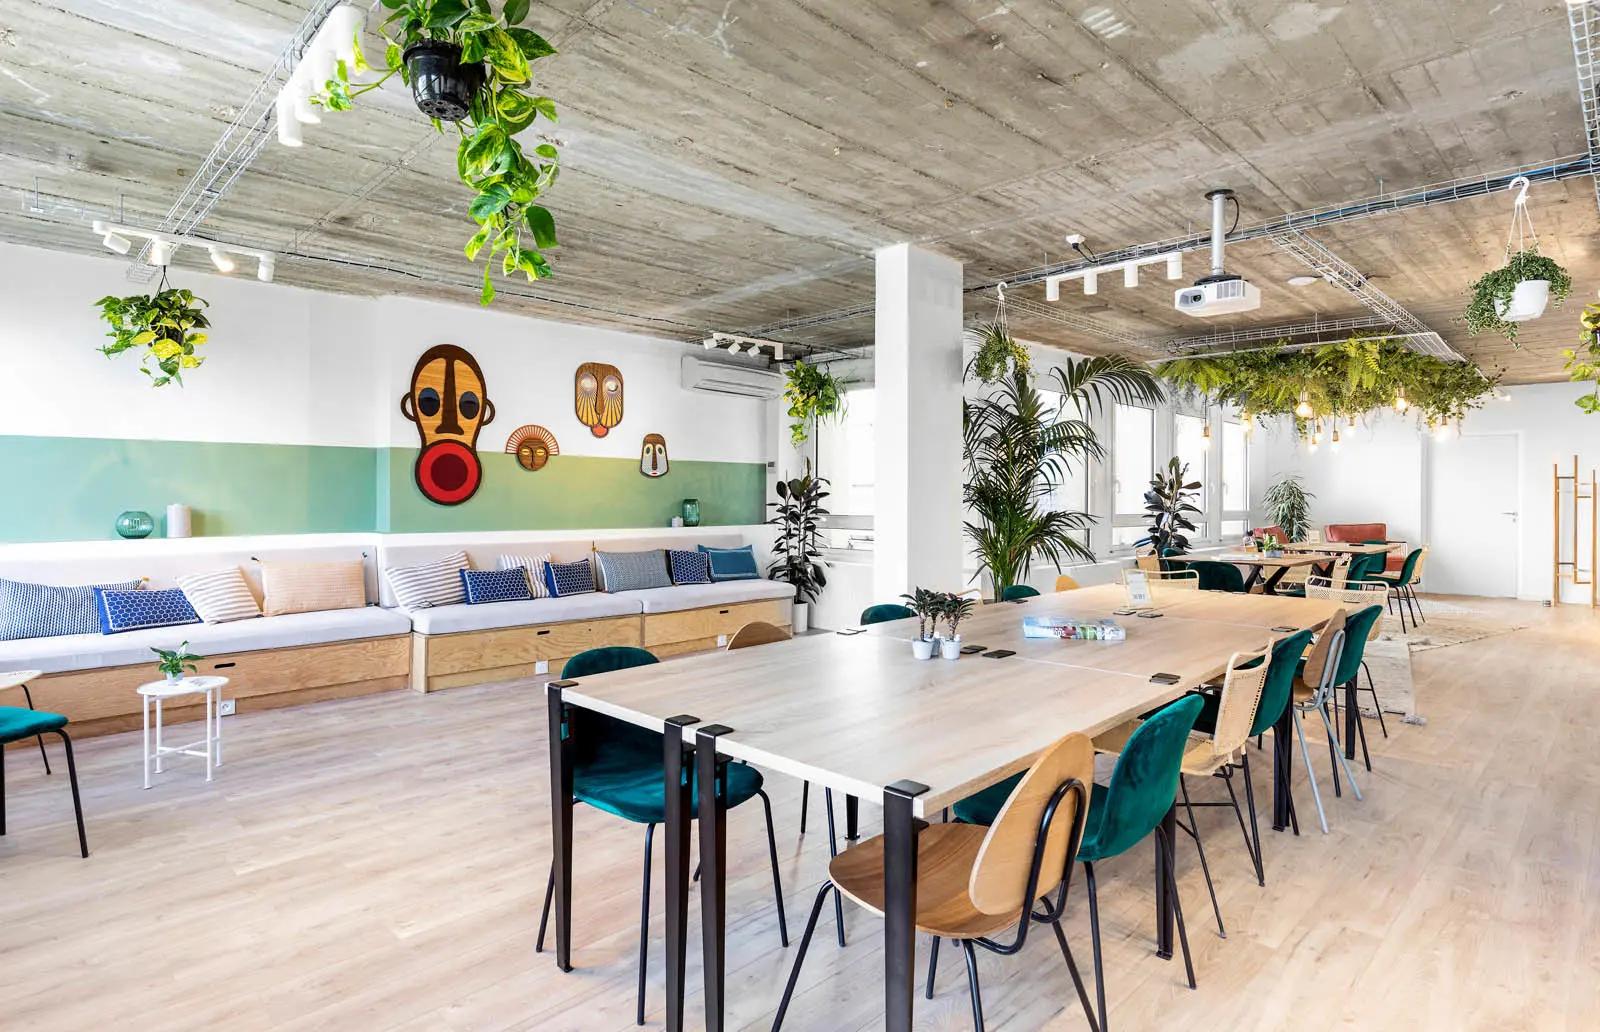 Meeting room in Large, luminous space with plant ceiling - 1